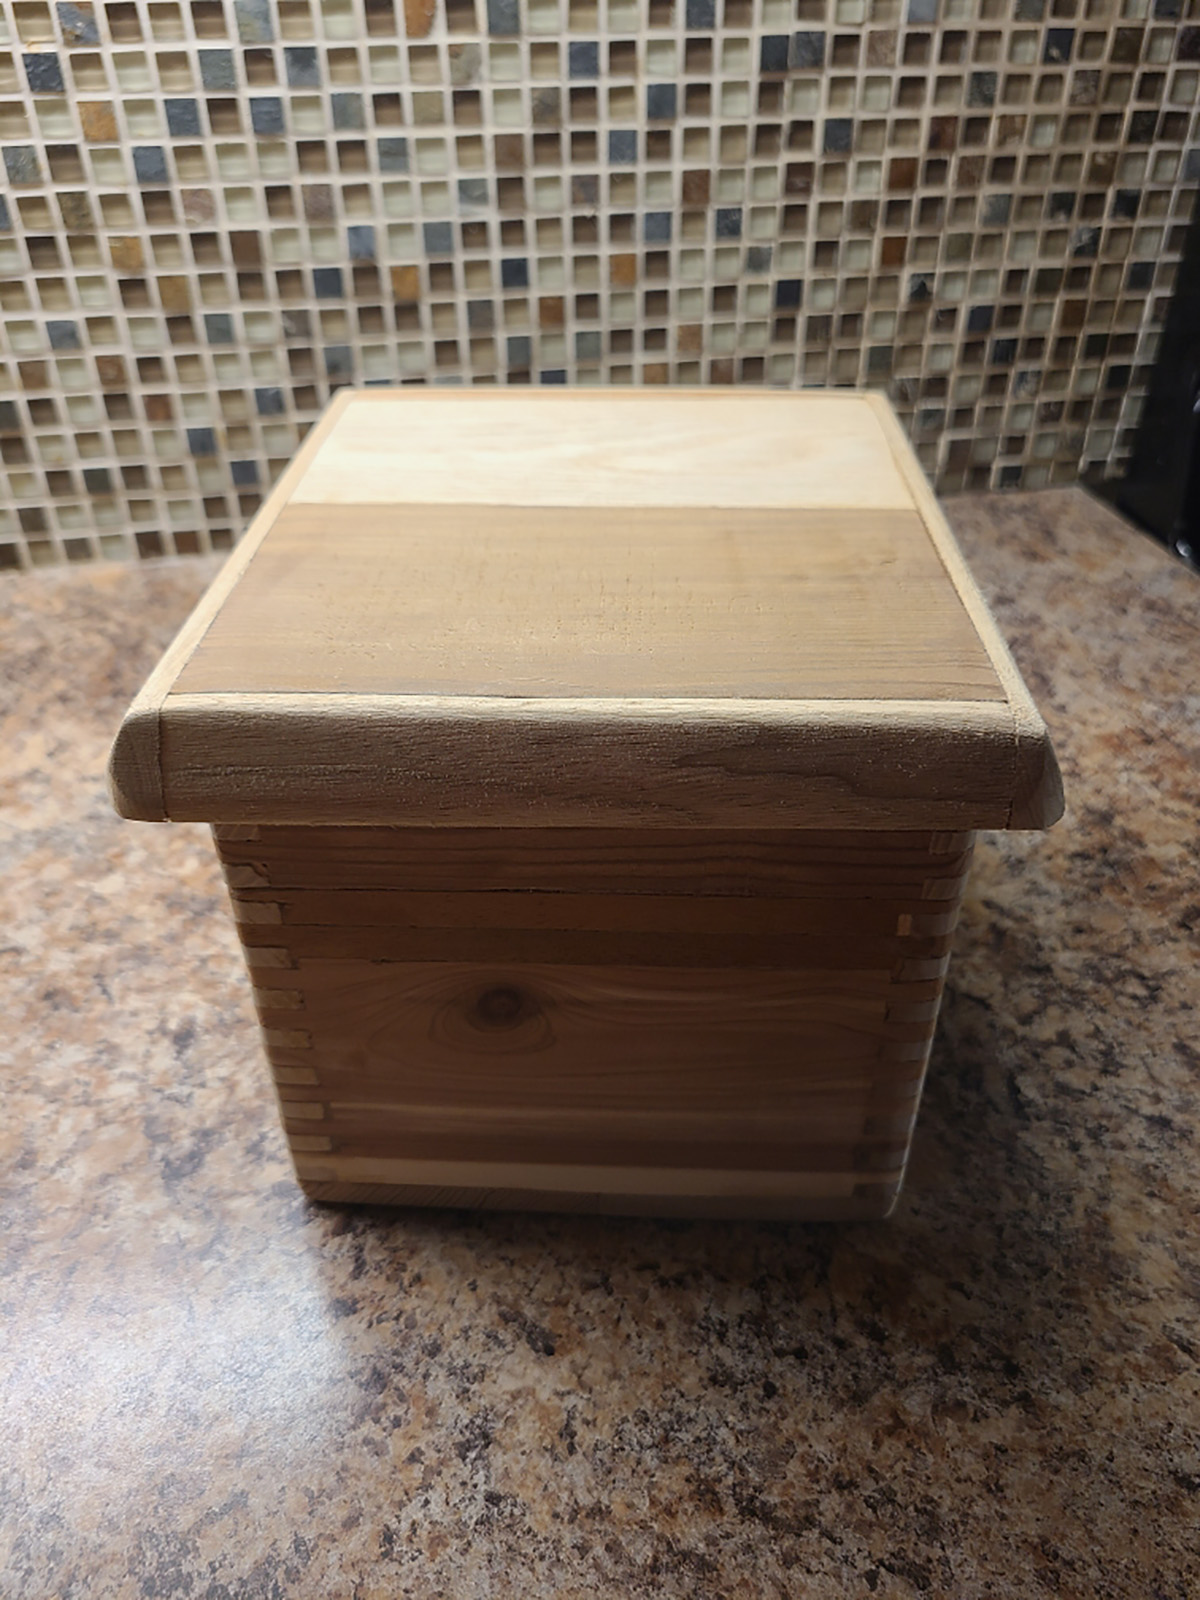 PHOTO: The recipe box built by George Nesrallah.